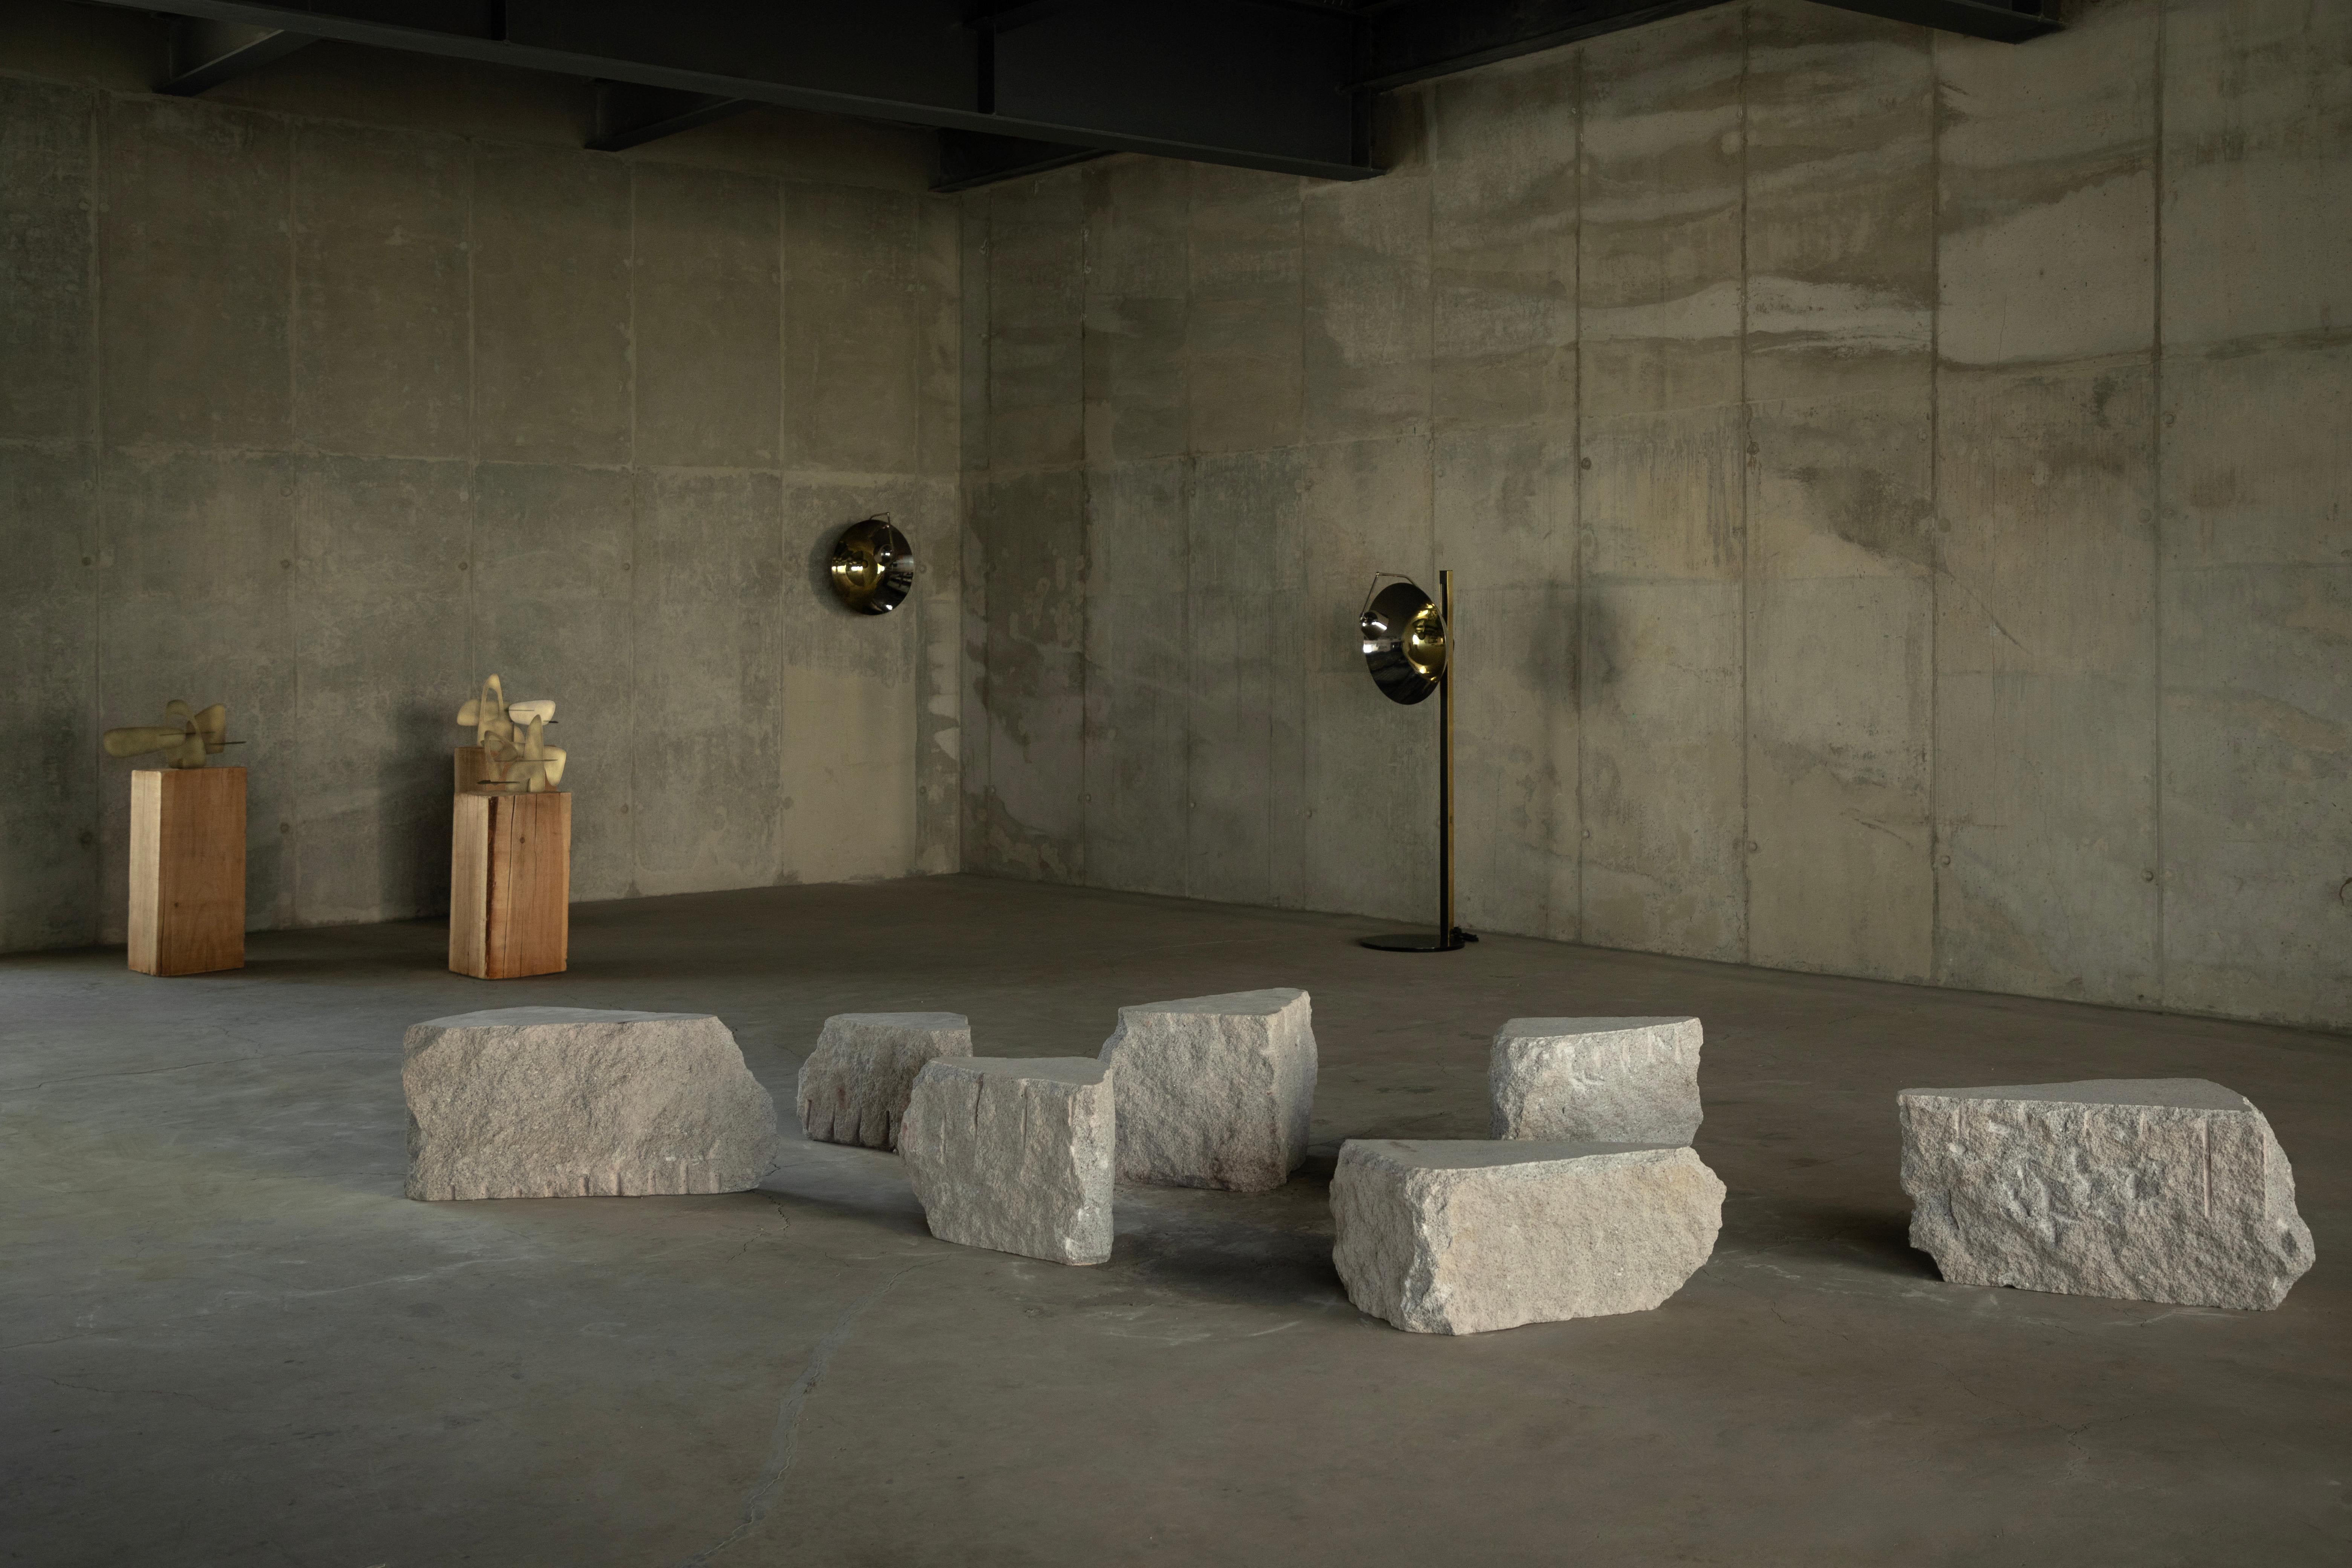 Laberinto Center Piece by Andres Monnier.
Dimensions: D 90 x W 170 x H 40 cm
Materials: Quarry stone.

Andrés Monnier, born in Guadalajara but based in Ensenada, Mexico. His purpose is to create sculptural pieces to spread materialized consciousness